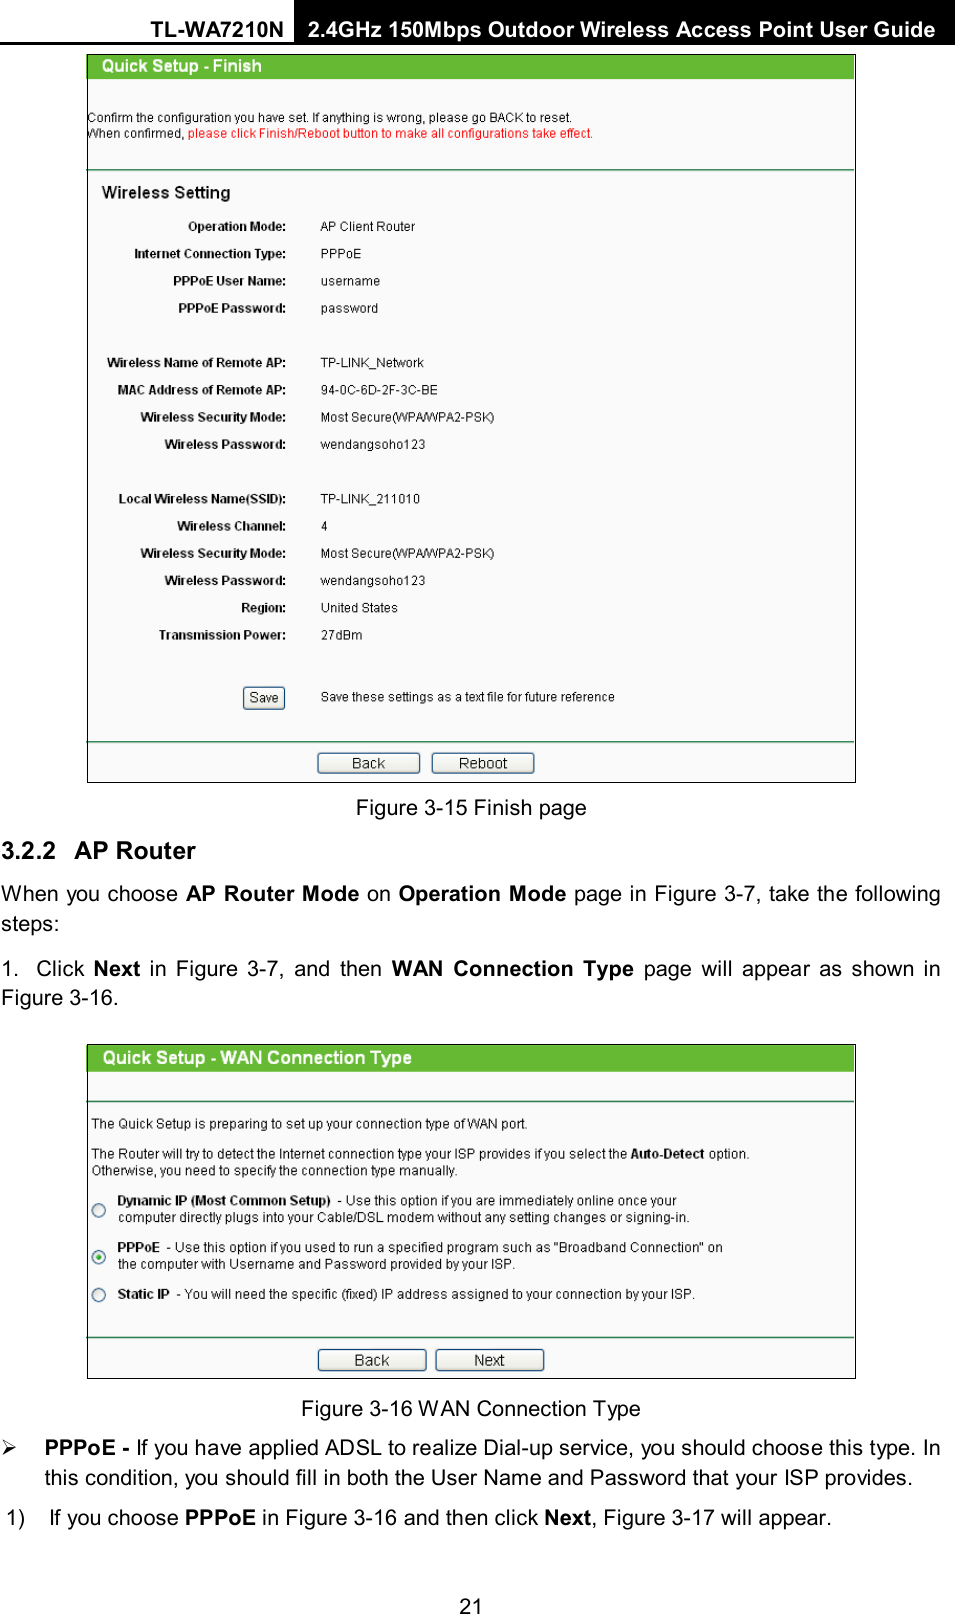 TL-WA7210N 2.4GHz 150Mbps Outdoor Wireless Access Point User Guide  21 Figure 3-15 Finish page 3.2.2 AP Router When you choose AP Router Mode on Operation Mode page in Figure 3-7, take the following steps: 1.  Click  Next in  Figure  3-7, and then WAN Connection Type page will appear as shown in Figure 3-16.    Figure 3-16 WAN Connection Type  PPPoE - If you have applied ADSL to realize Dial-up service, you should choose this type. In this condition, you should fill in both the User Name and Password that your ISP provides. 1) If you choose PPPoE in Figure 3-16 and then click Next, Figure 3-17 will appear. 